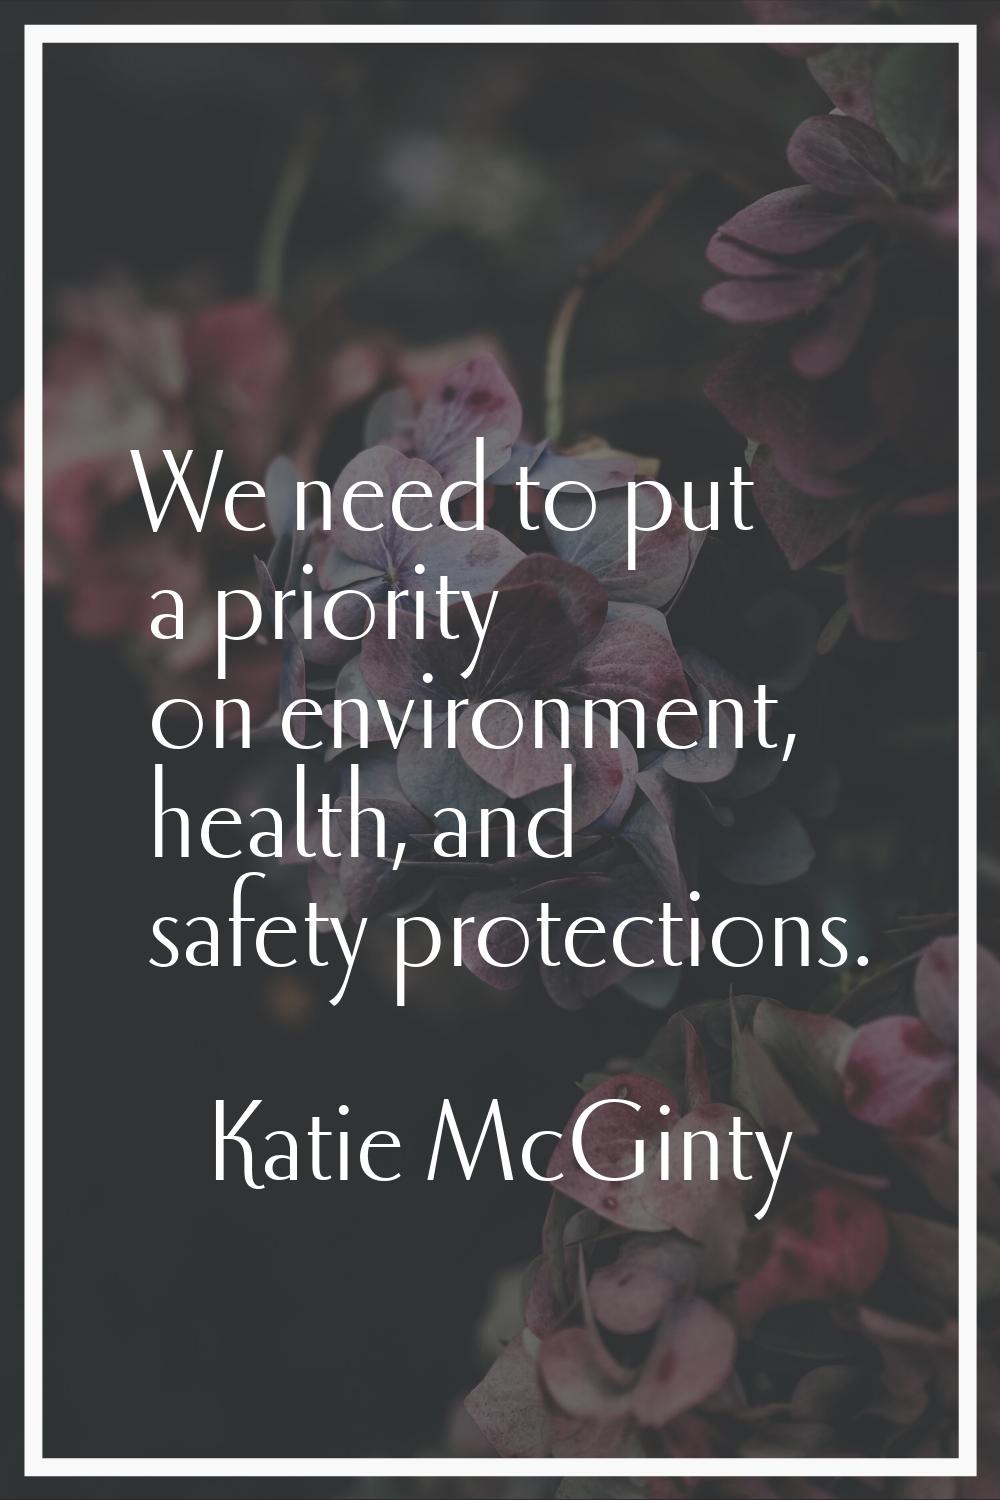 We need to put a priority on environment, health, and safety protections.